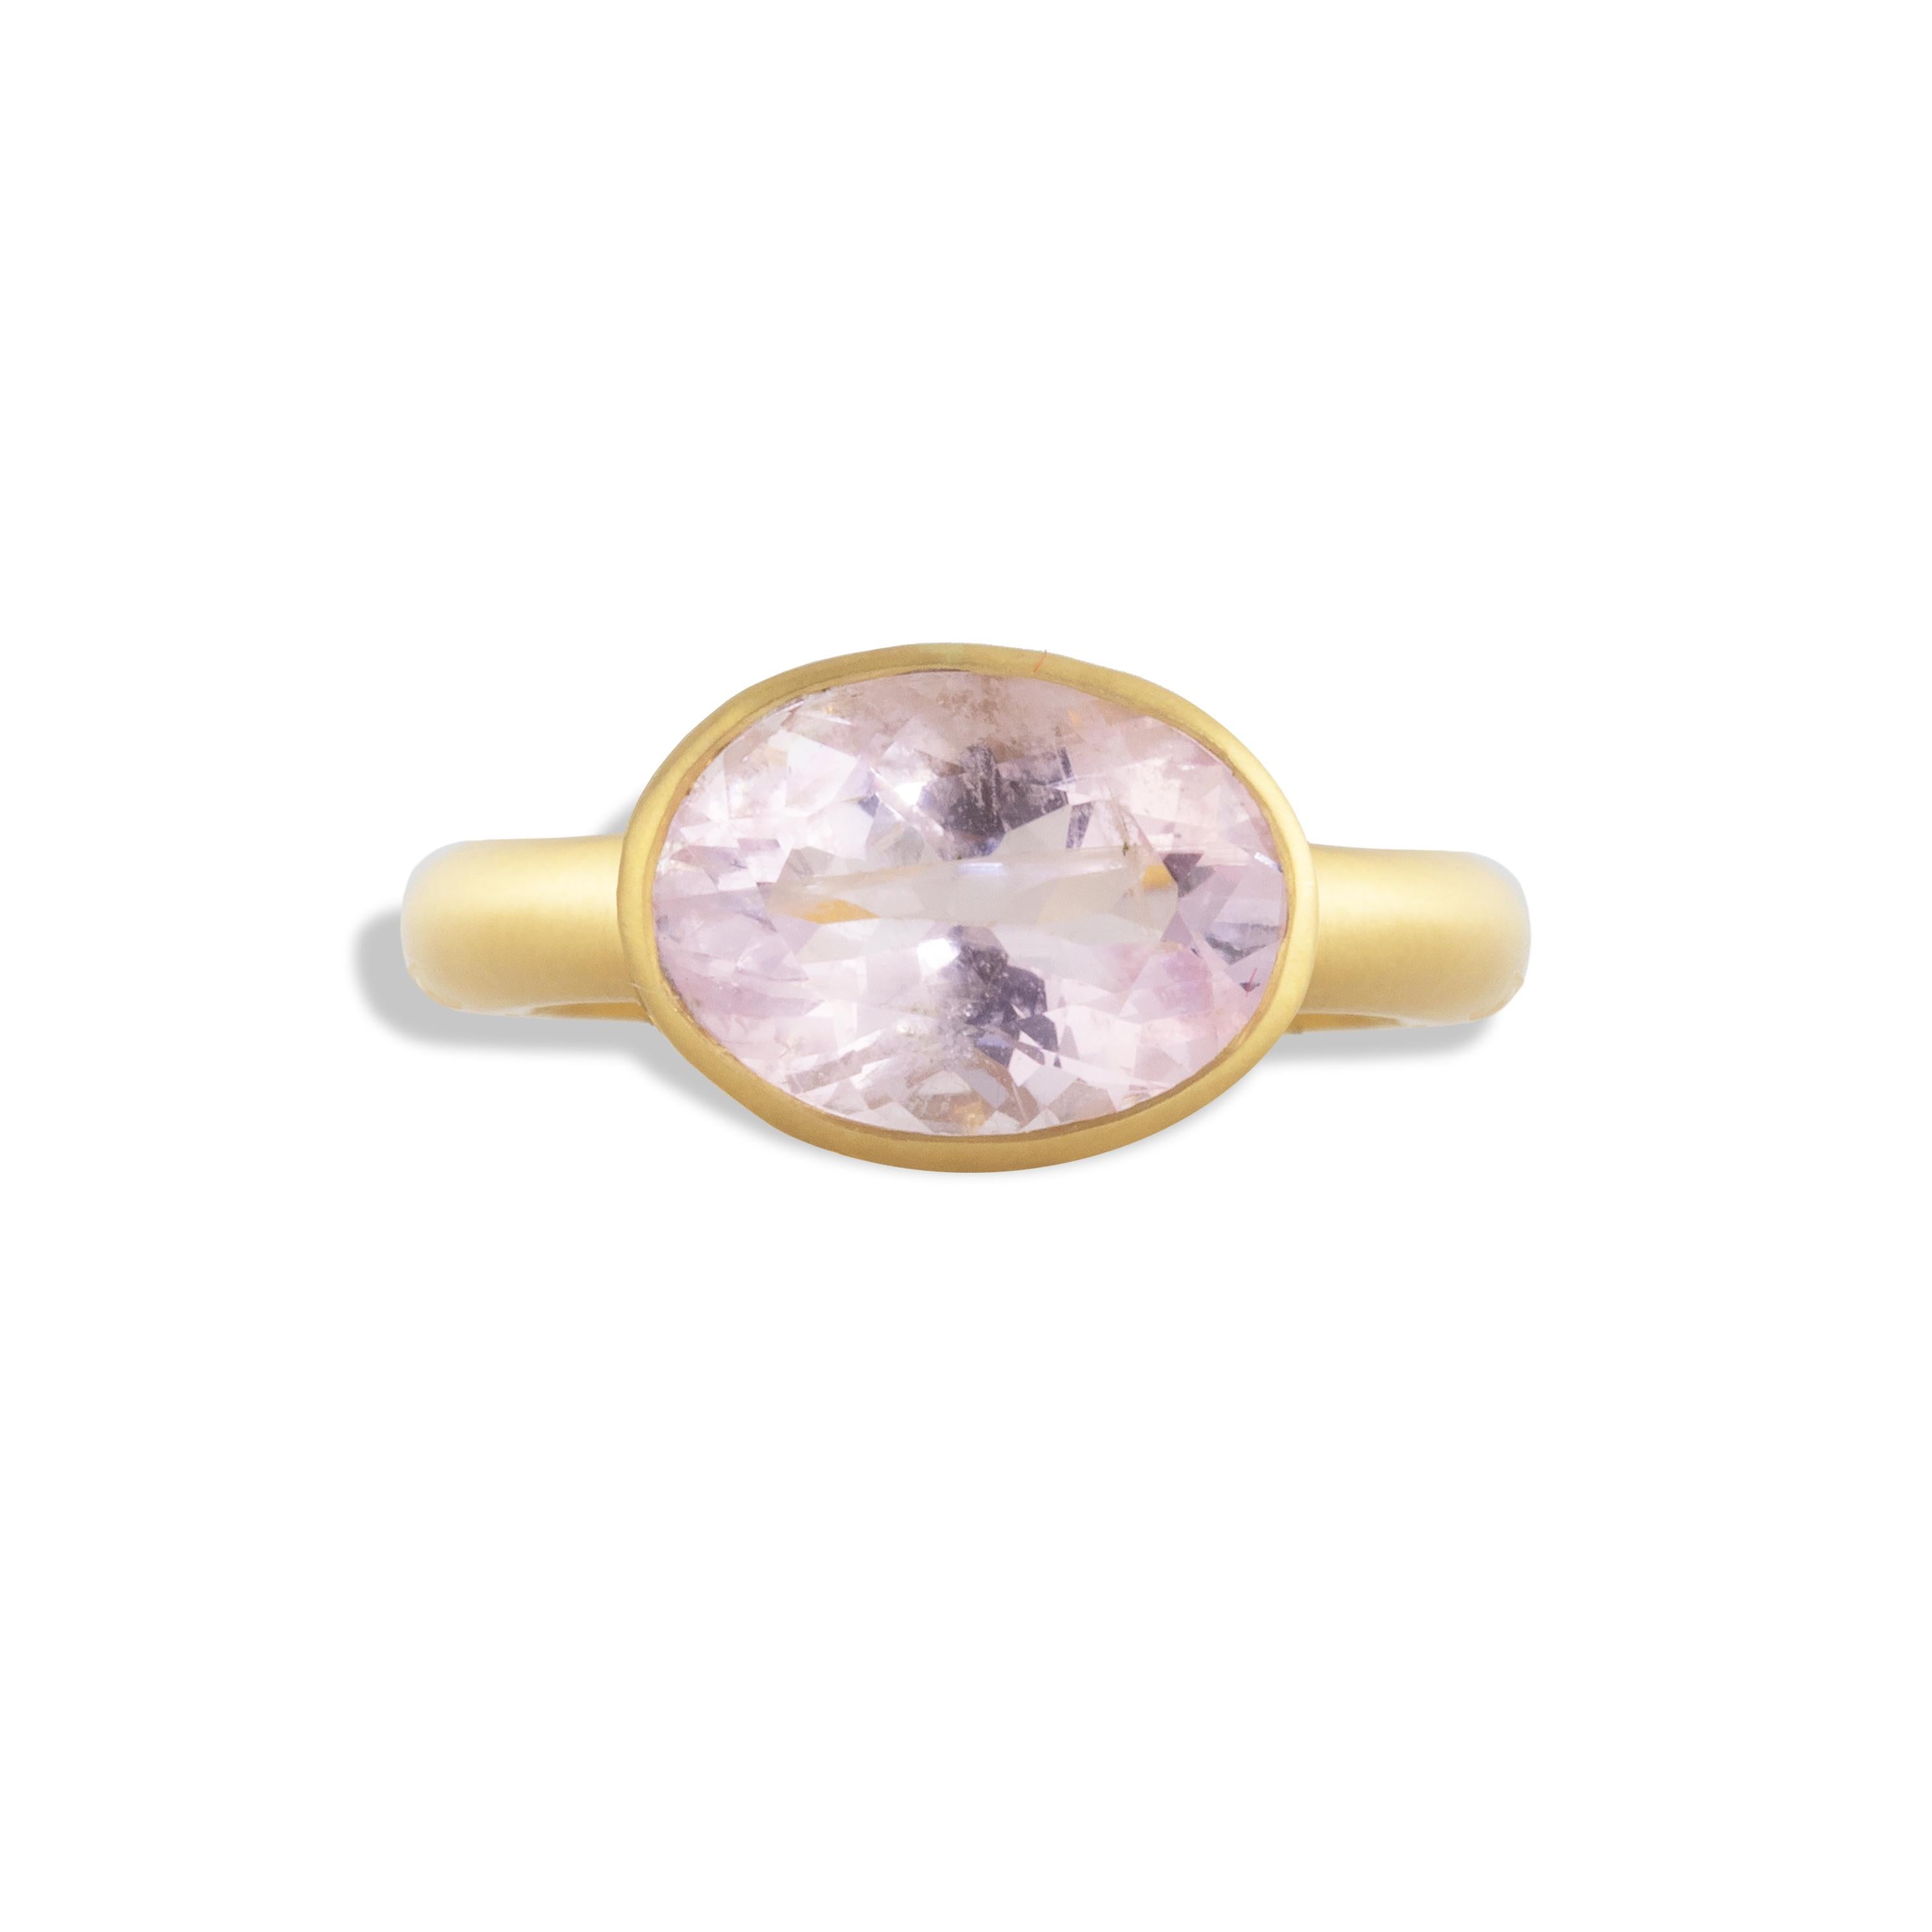 A dreamy, soft stand-out 3.52 carat Morganite oval gemstone, framed in a hand-made setting framed with jali work and set in 18k matte yellow gold.  The soft pink Beryl, also known as  'pink emerald,' peeks through the Jali wave cut-outs along the